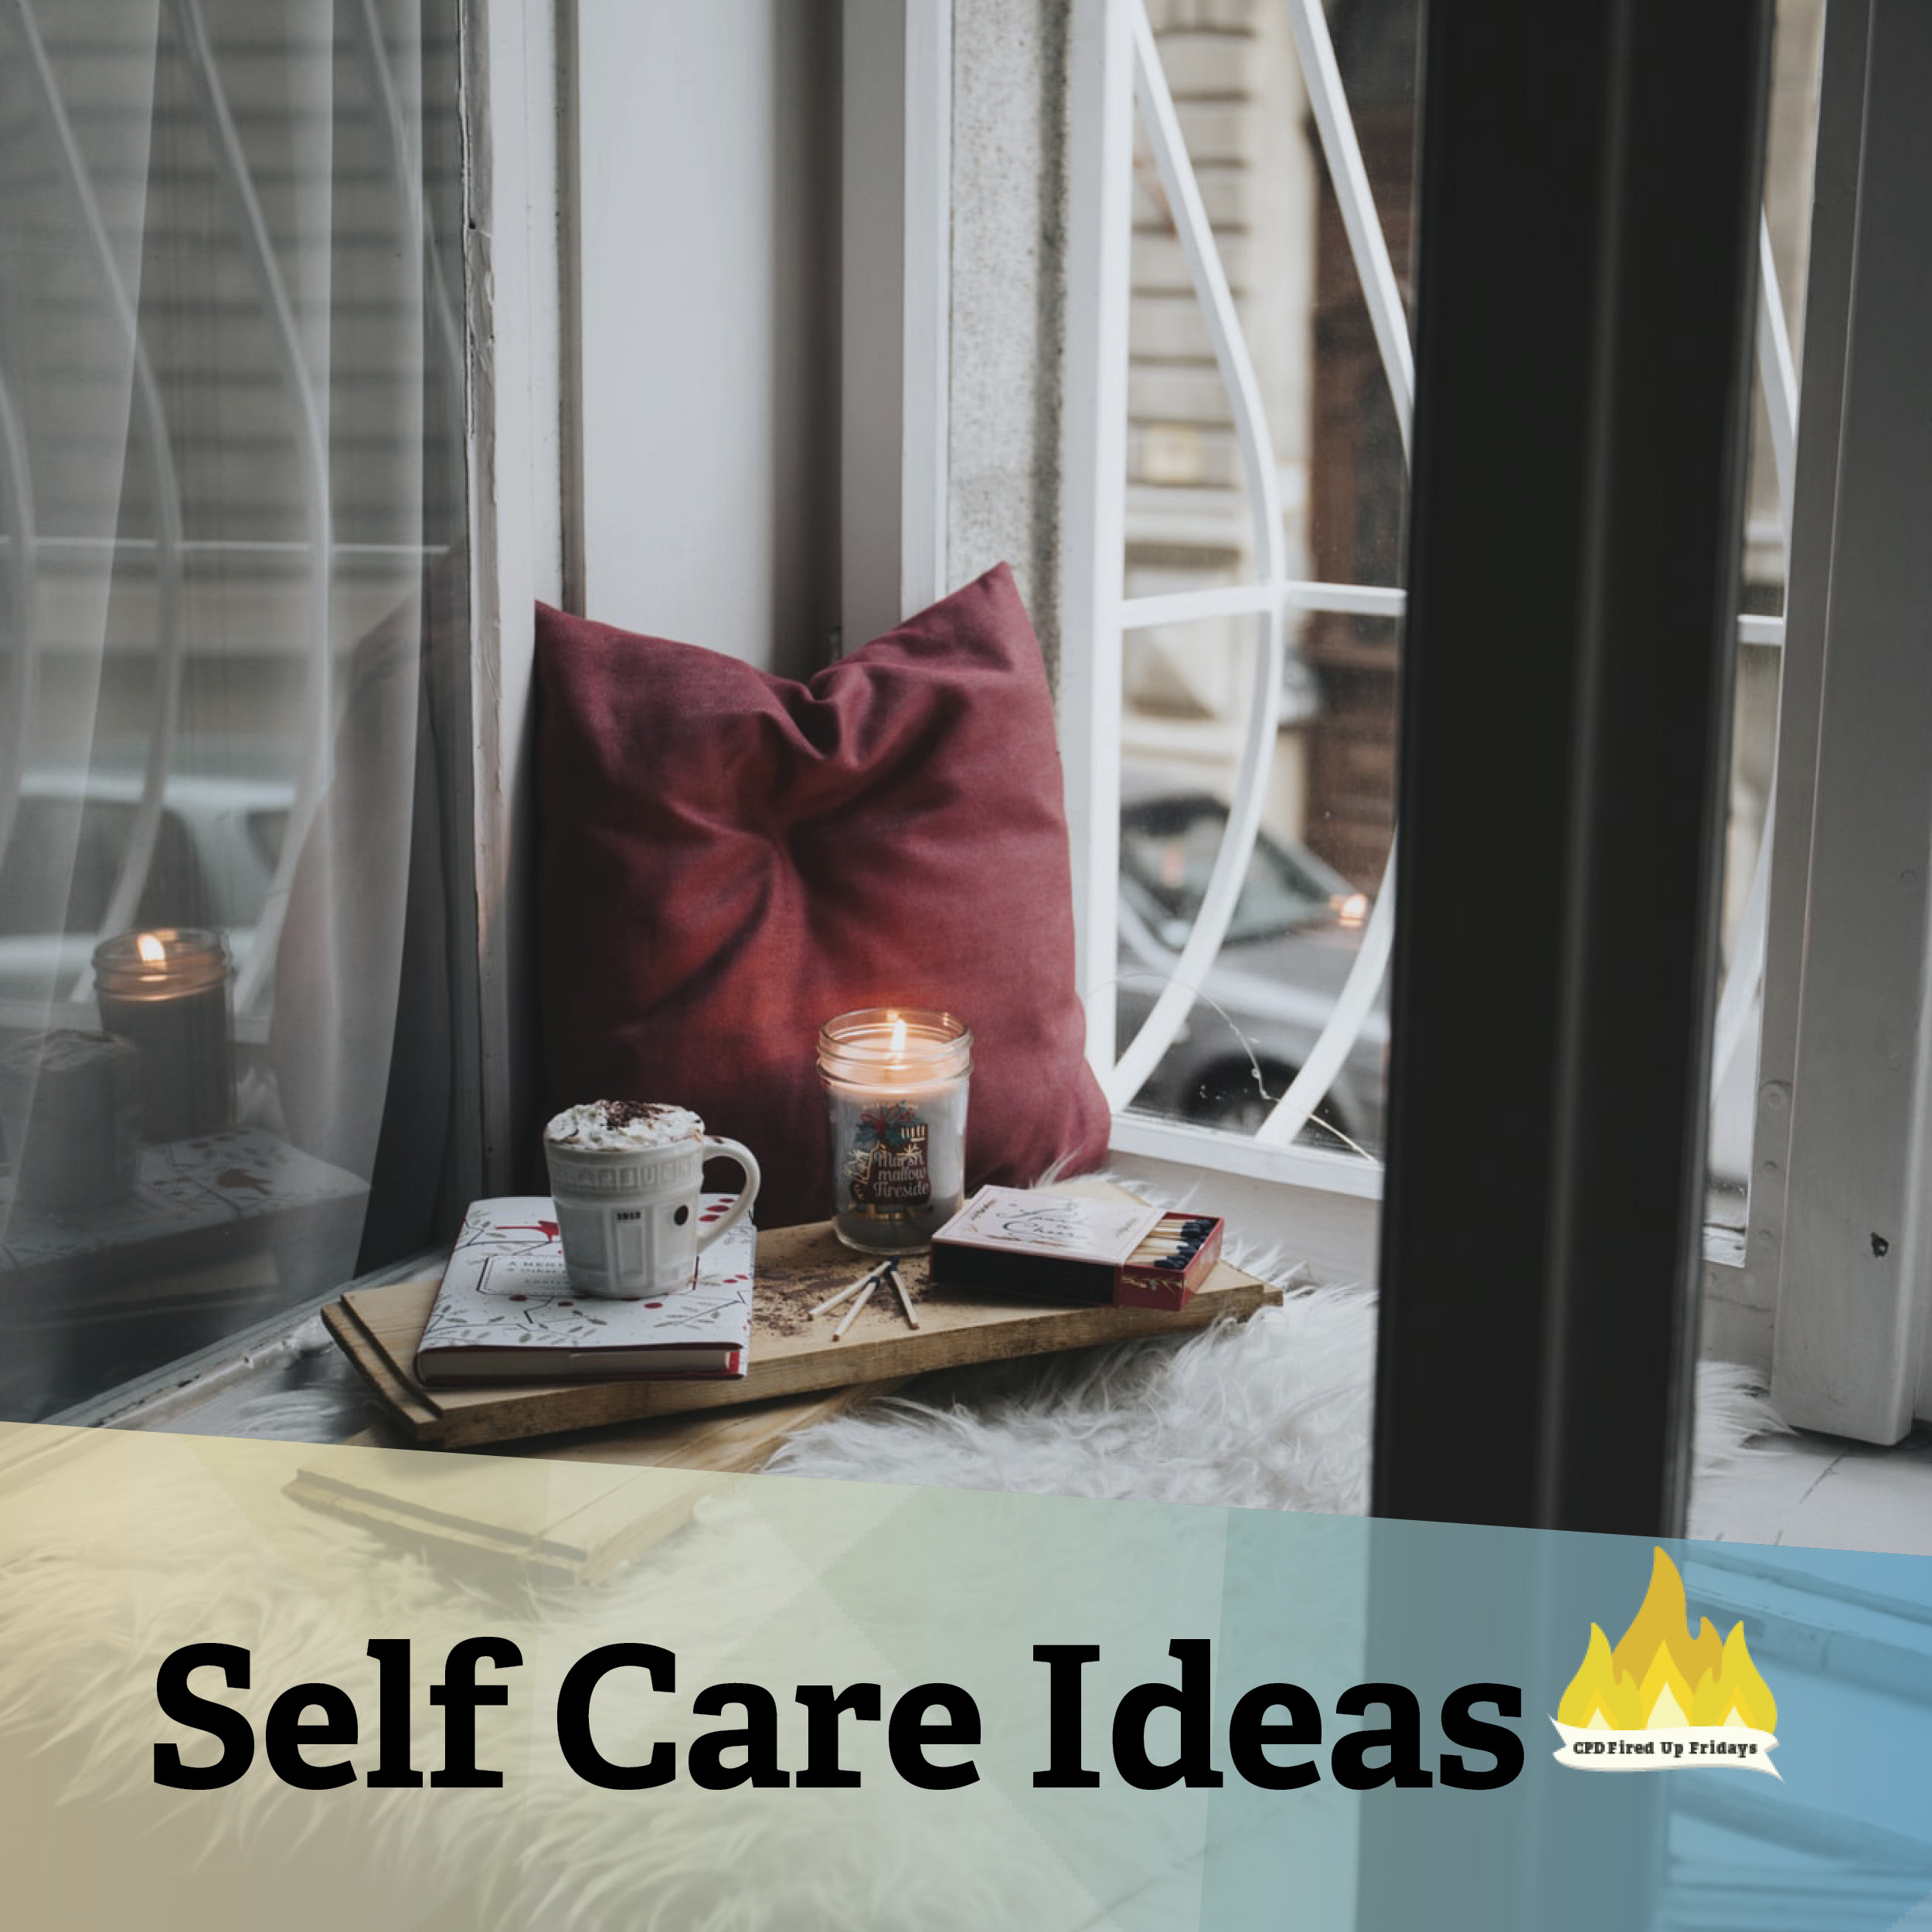 A red pillow leans against a window, with a tray sitting in front of it. On the tray, a cup of cocoa brimming with marshmallows rests on a book, and a candle flickers beside it. Underneath, text reads: 'Self Care Ideas.'